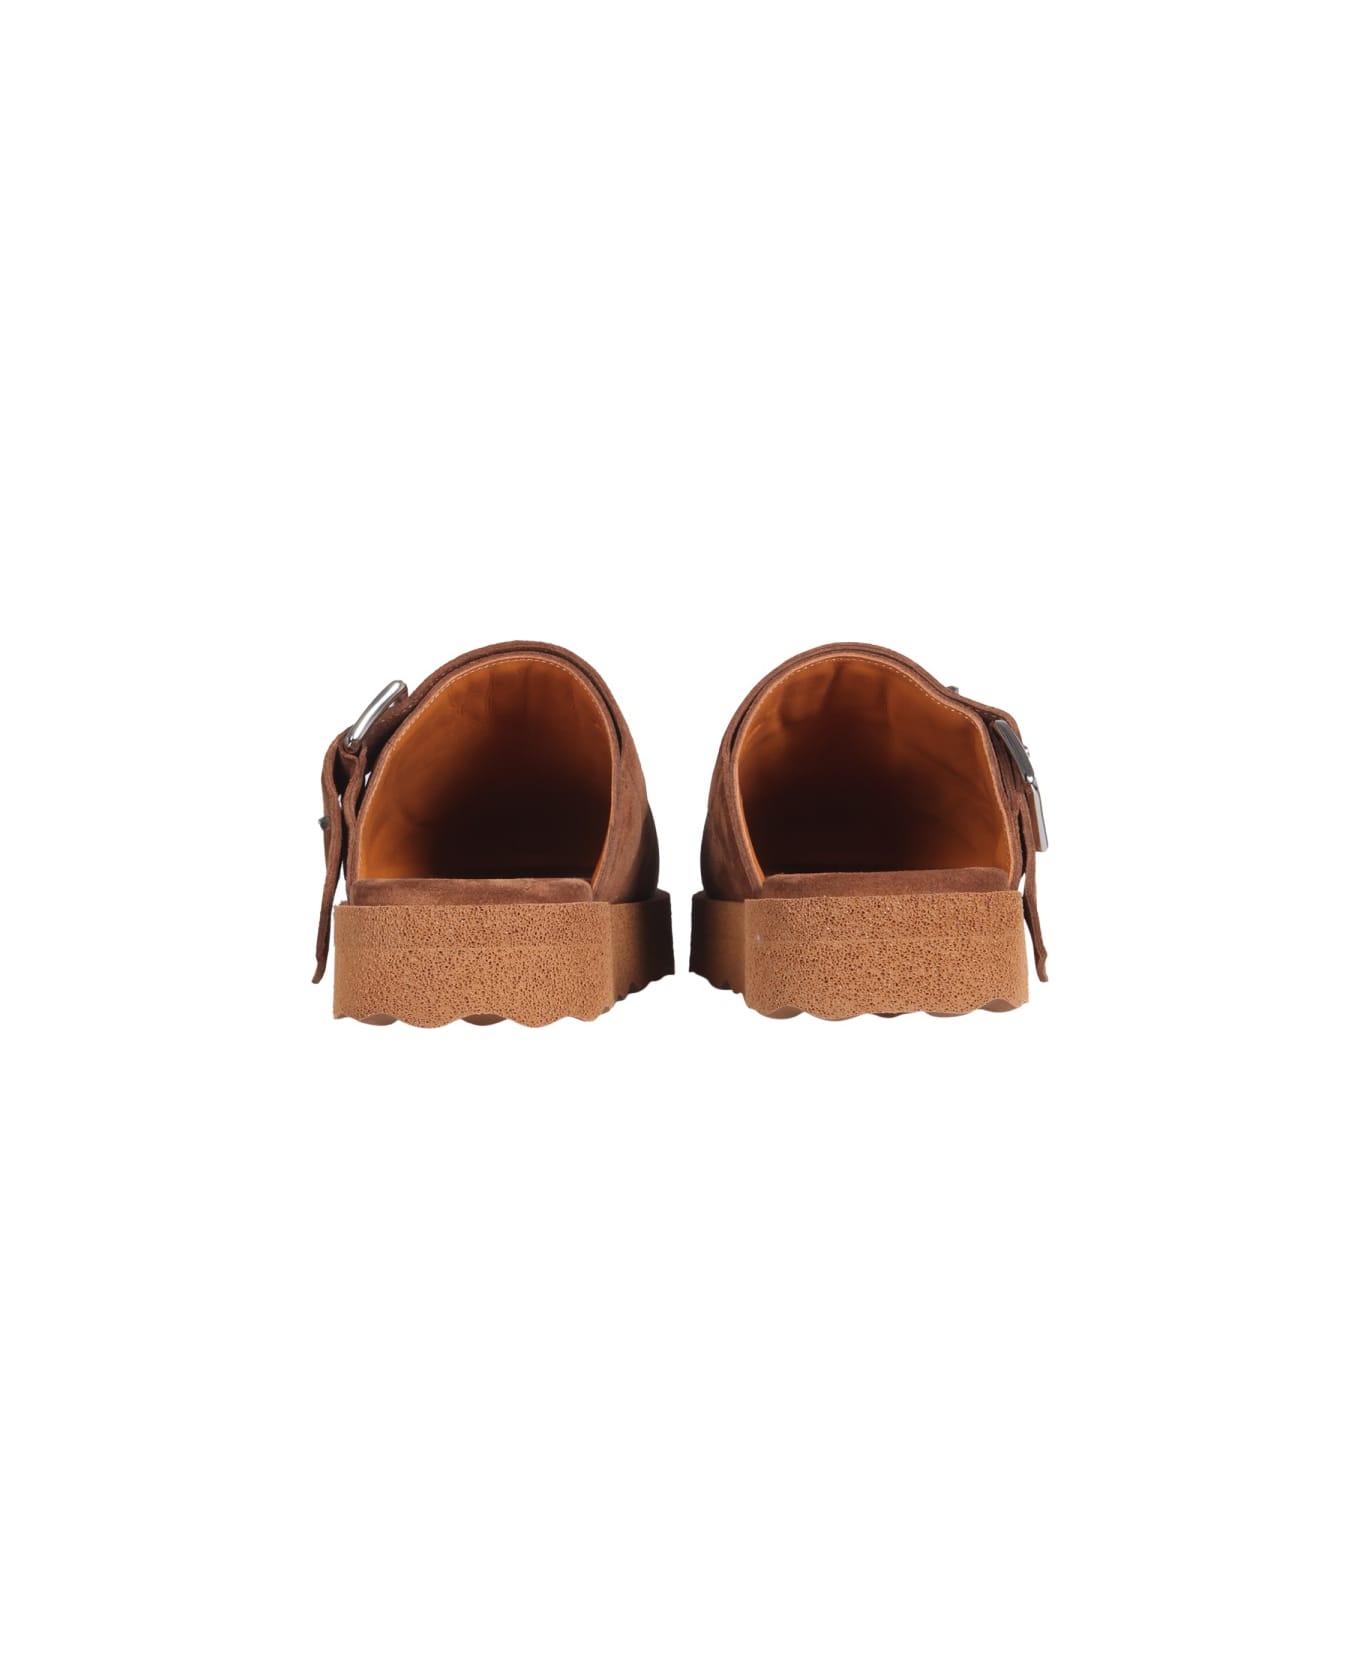 Off-White Comfort Slippers - BROWN